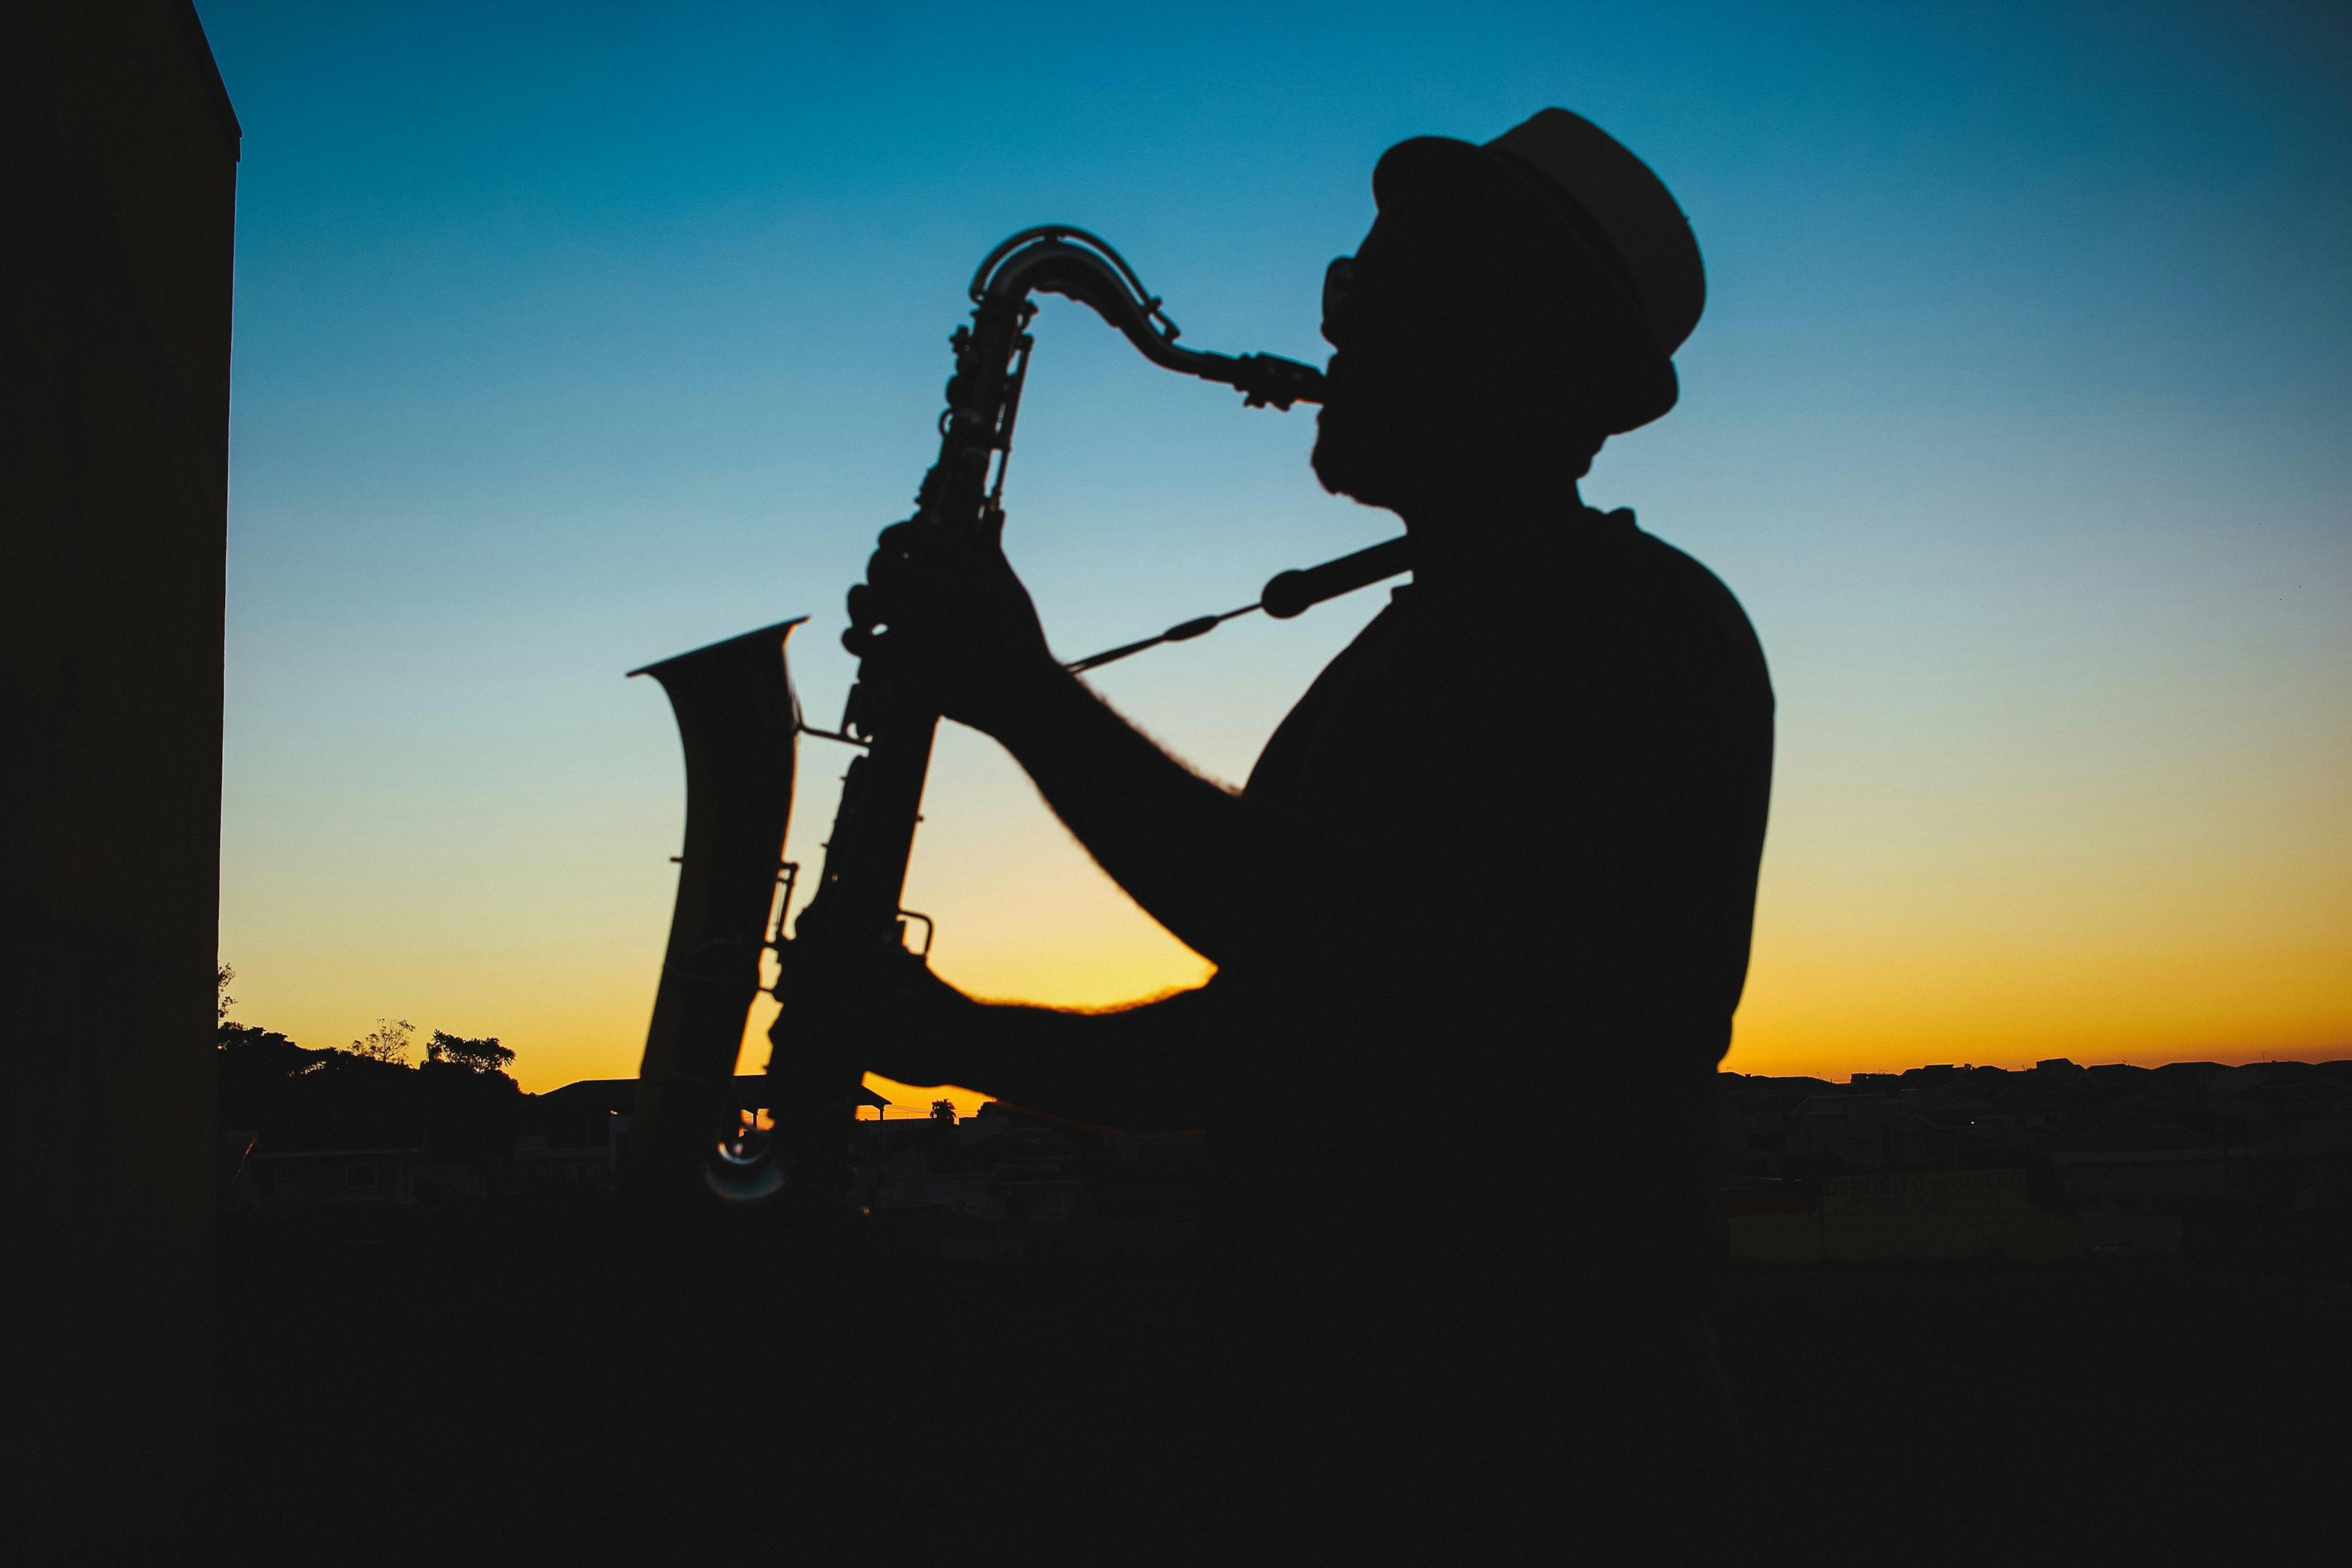 https://www.pexels.com/photo/silhouette-of-a-man-playing-saxophone-during-sunset-733767/